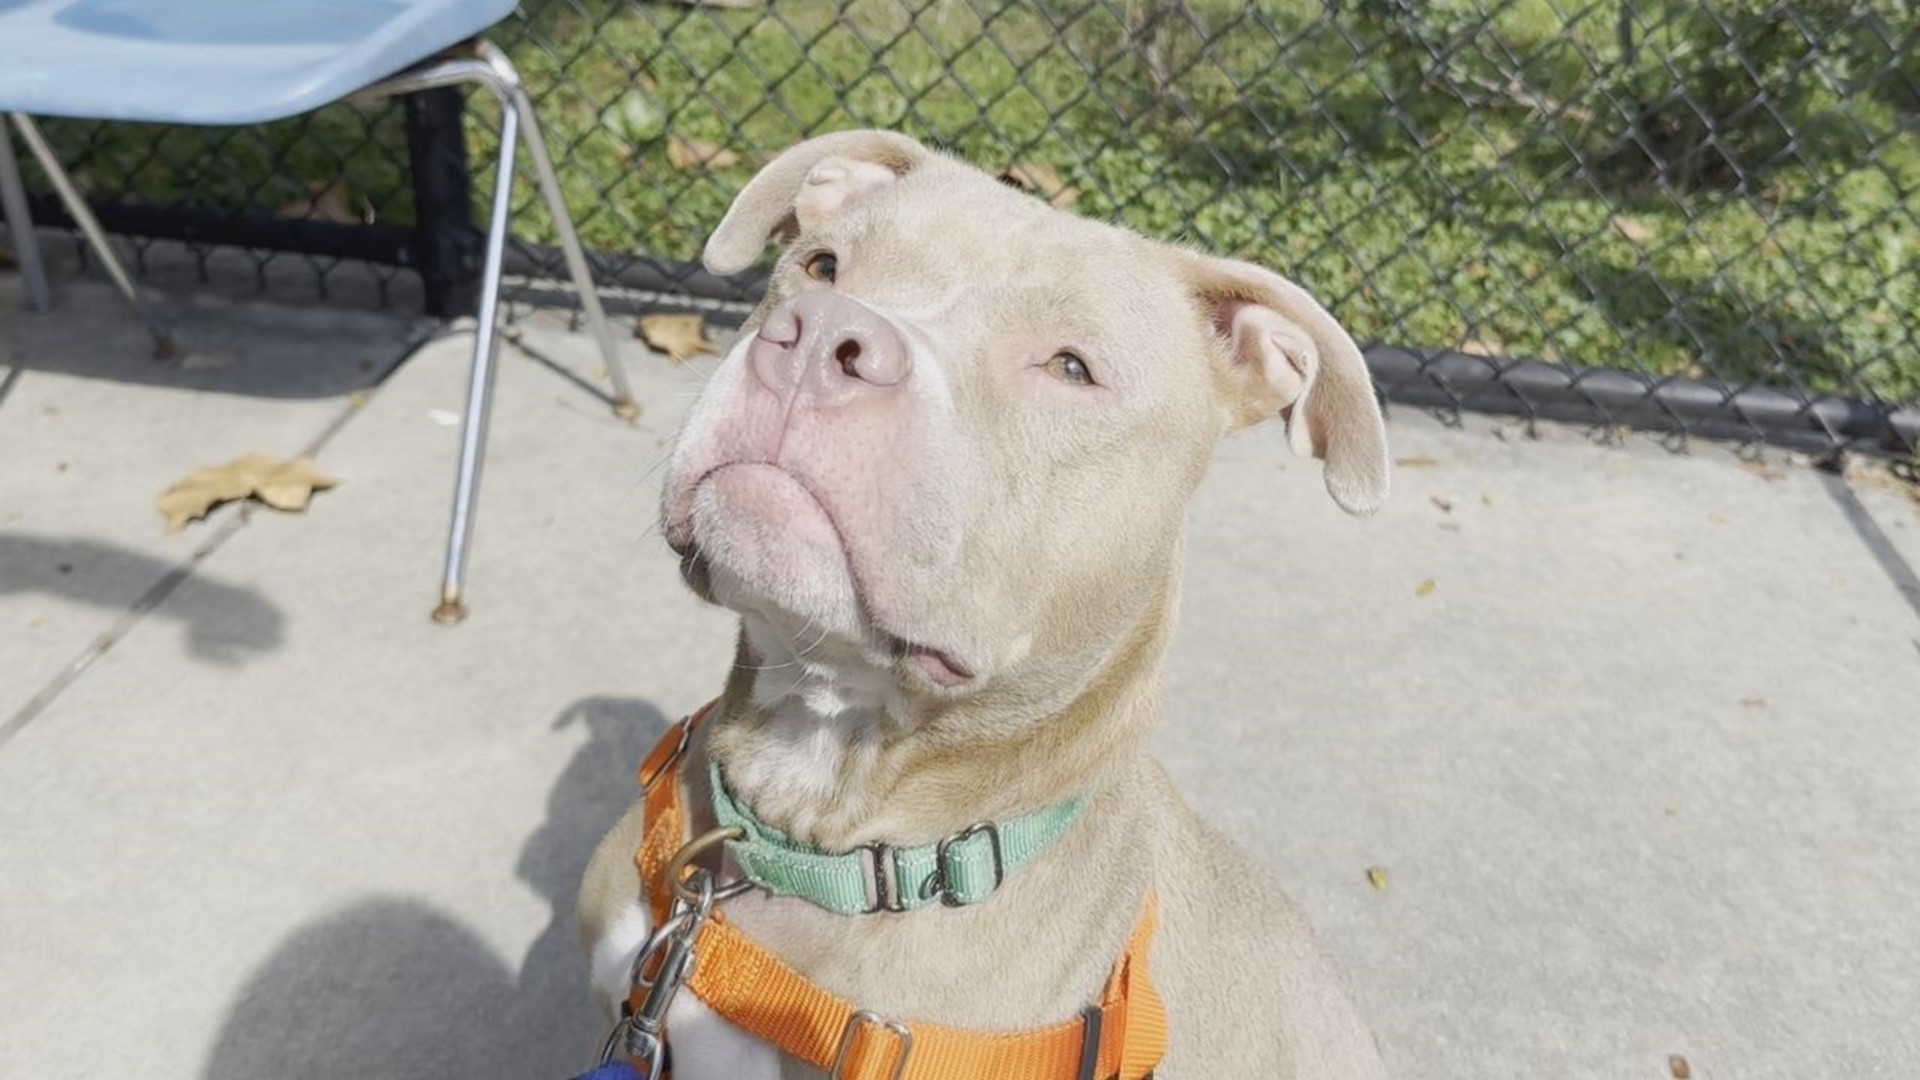 Biscuit is a sweet and friendly dog who would be a great fit for a family adopting for the first time!